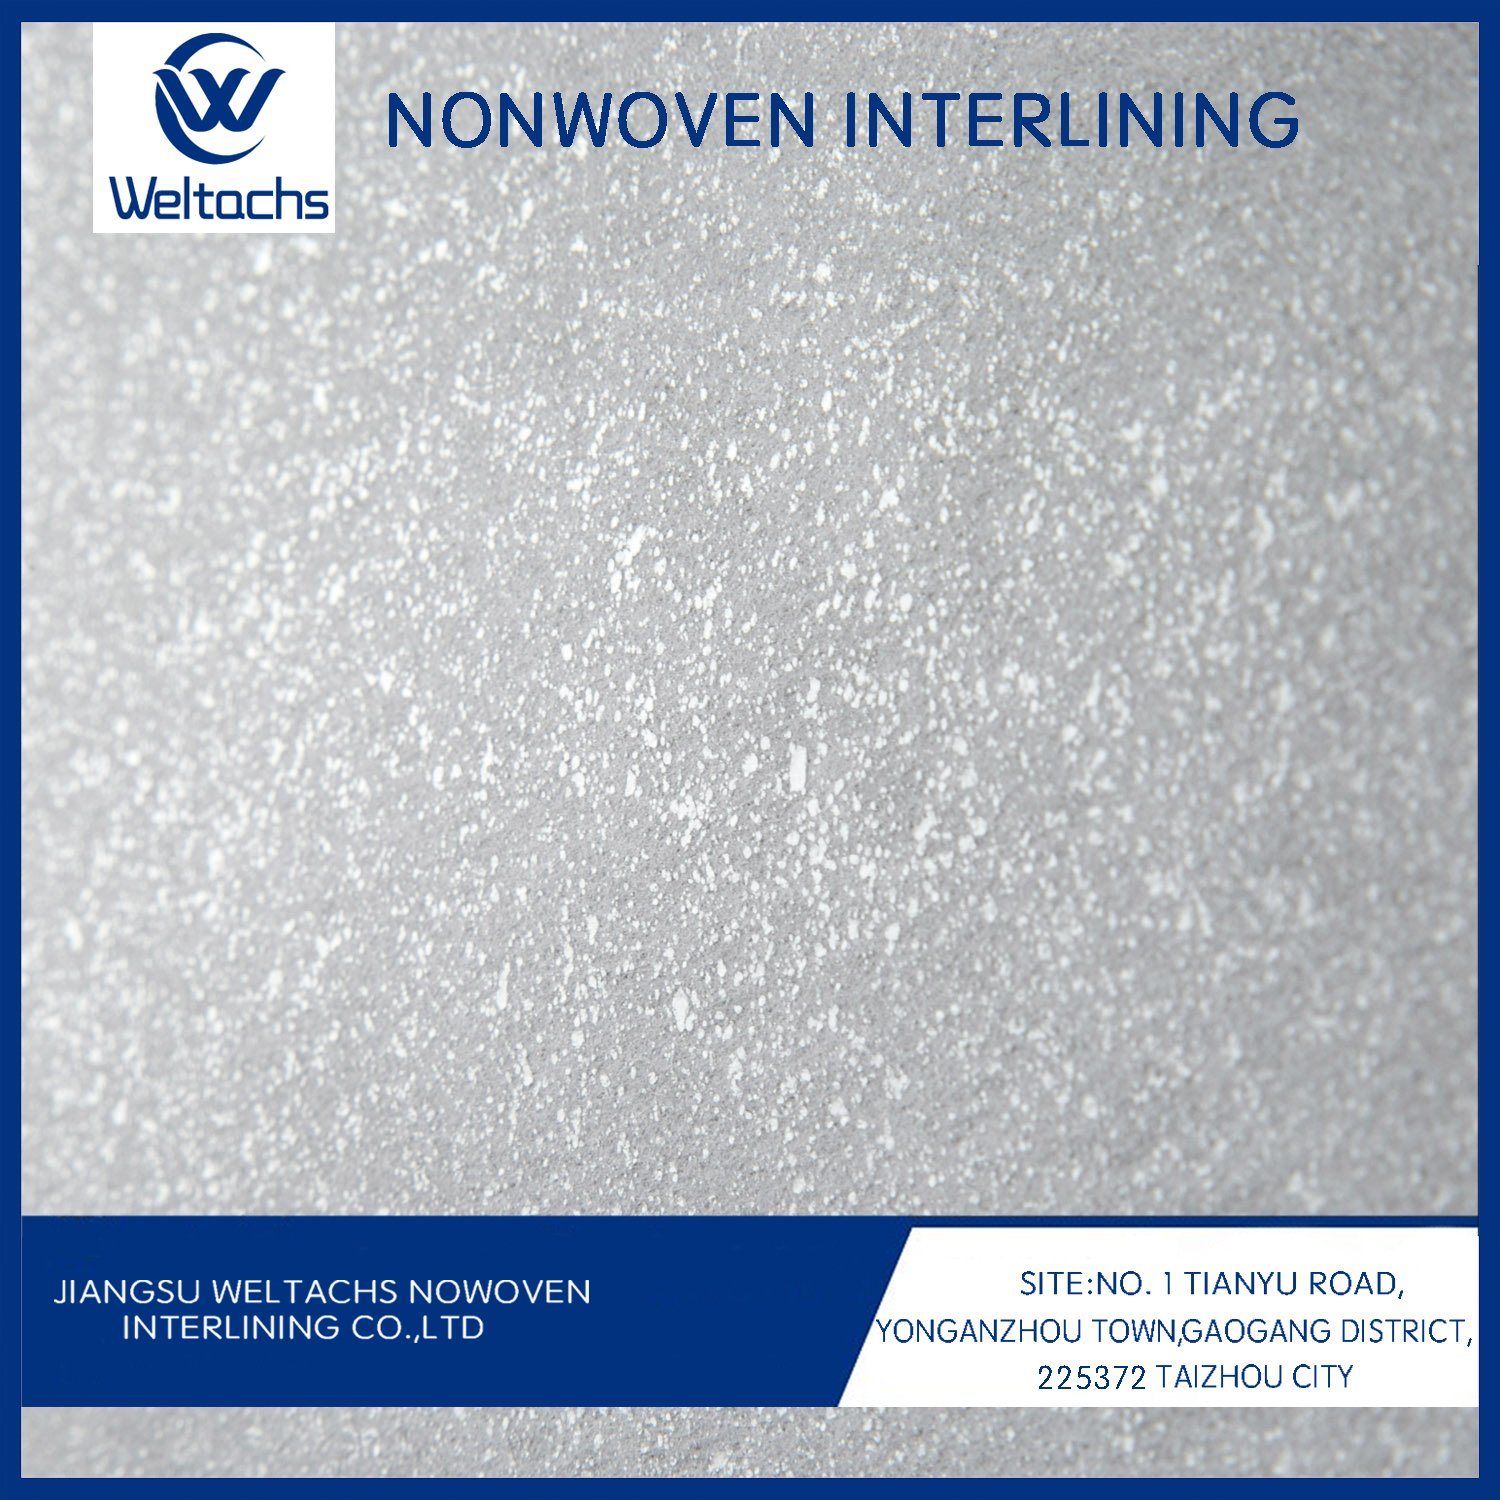 Proved Nonwoven Tailored Suit Thermal Bond Interlining